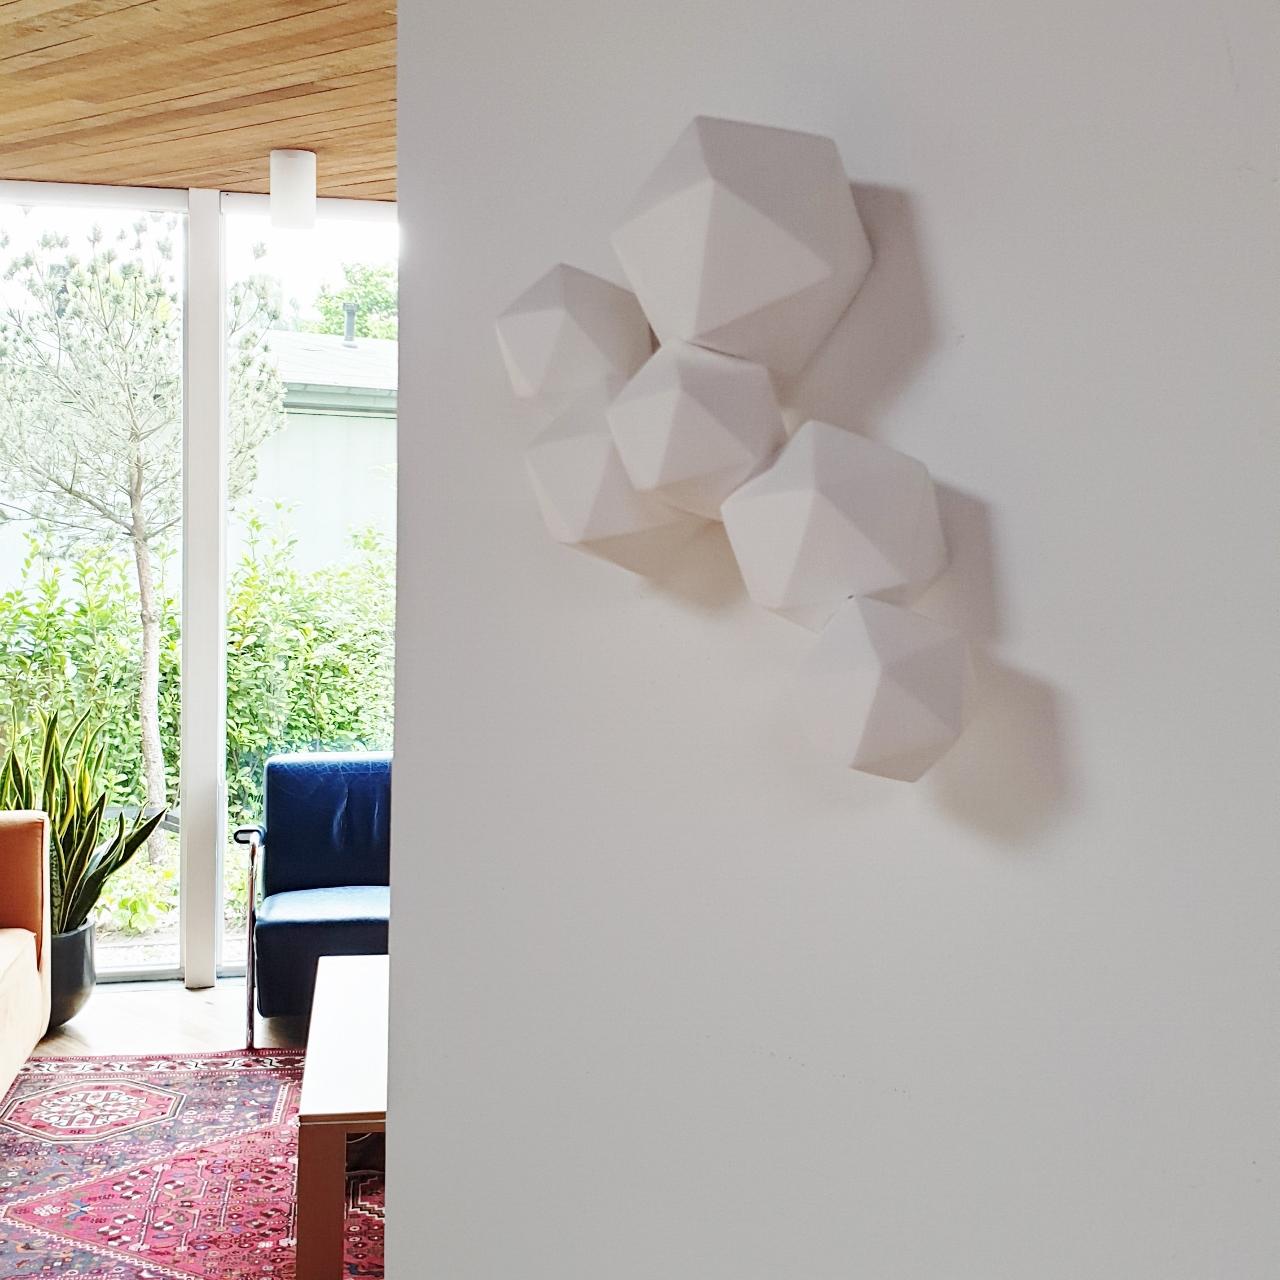 Icosahedron 6 - contemporary modern abstract geometric ceramic wall sculpture - Sculpture by Mo Cornelisse